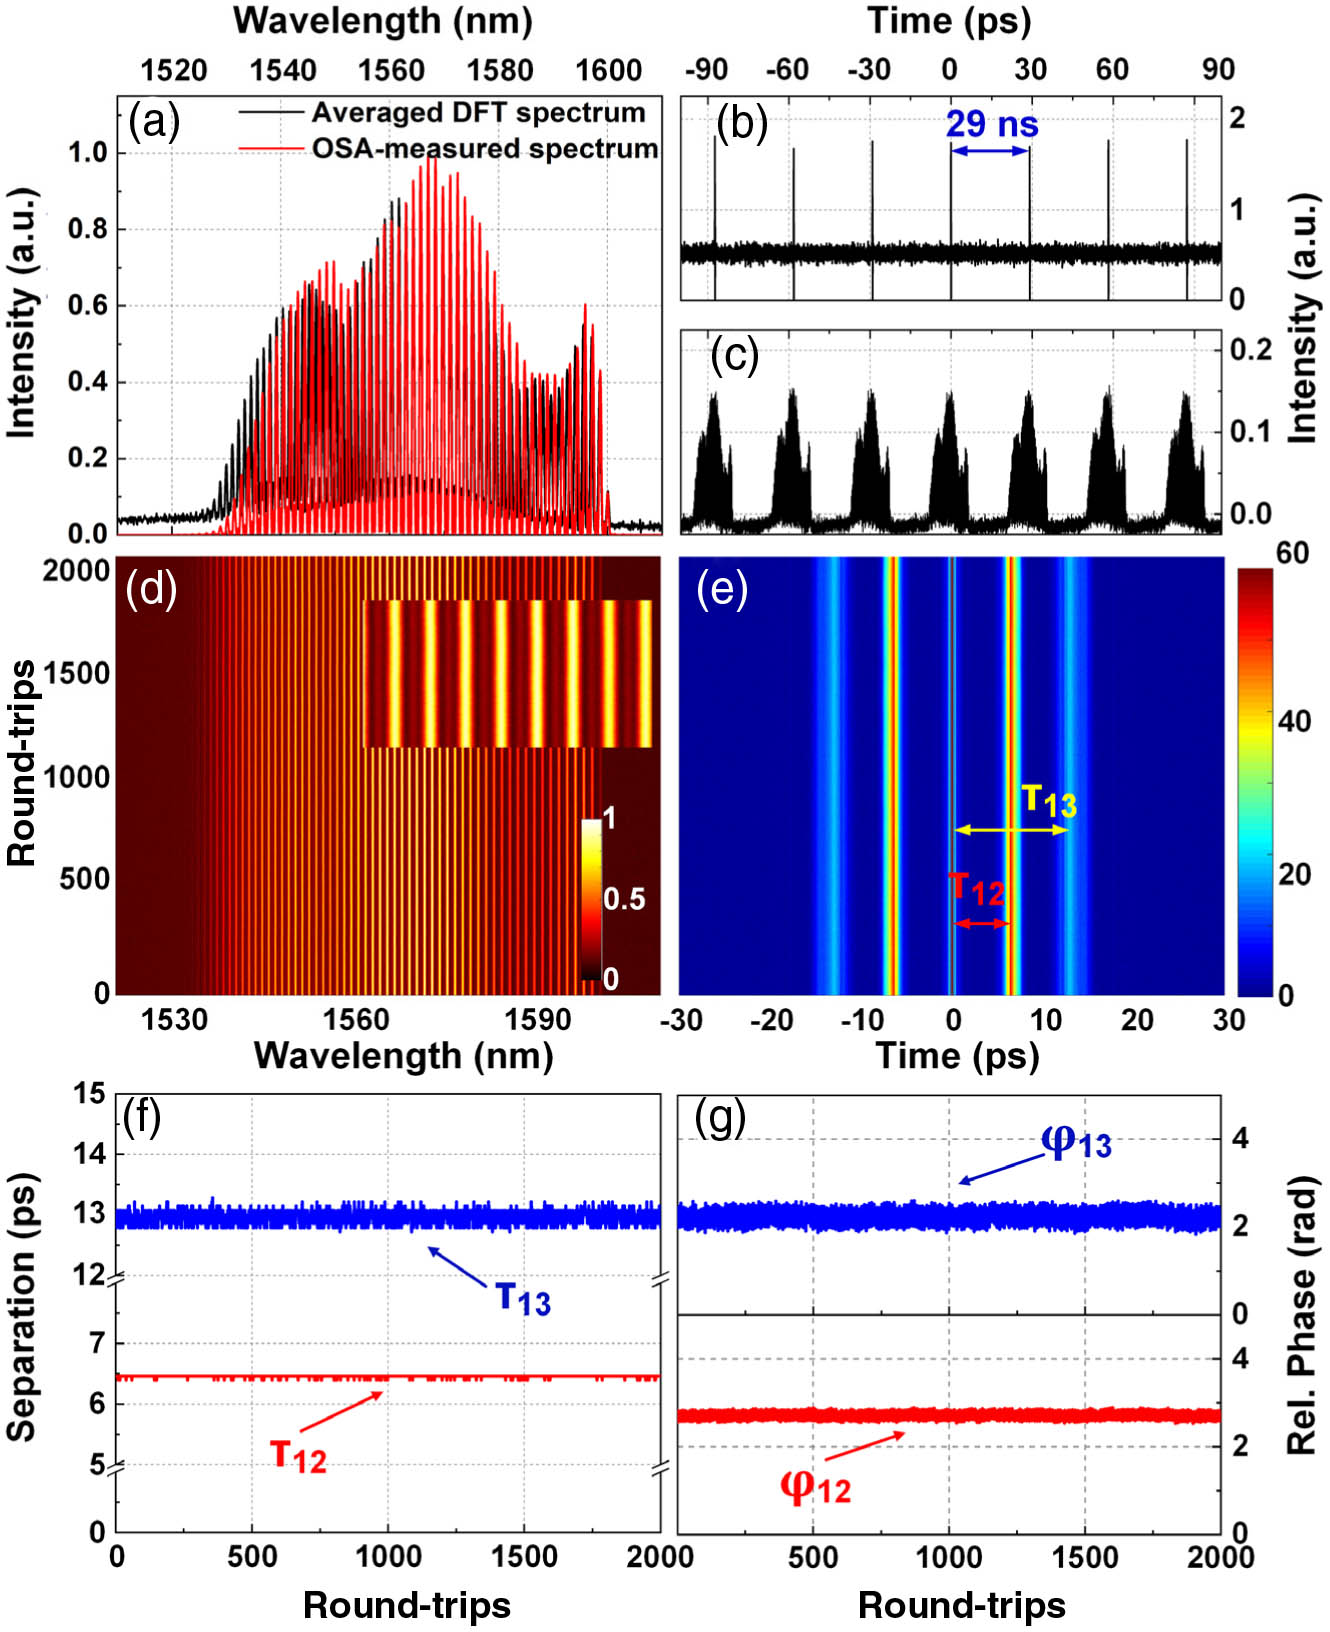 Stationary equally spaced soliton triplet. (a) Averaged DFT spectrum (black line) and OSA-measured spectrum (red line); (b), (c) pulse trains before and after DFT; (d) 2D contour plot of the shot-to-shot spectra, and the inset shows the close-up; (e) 2D contour plot of the shot-to-shot first-order autocorrelation traces; (f), (g) retrieved temporal separations and relative phases of the central pulse and tailing pulse.